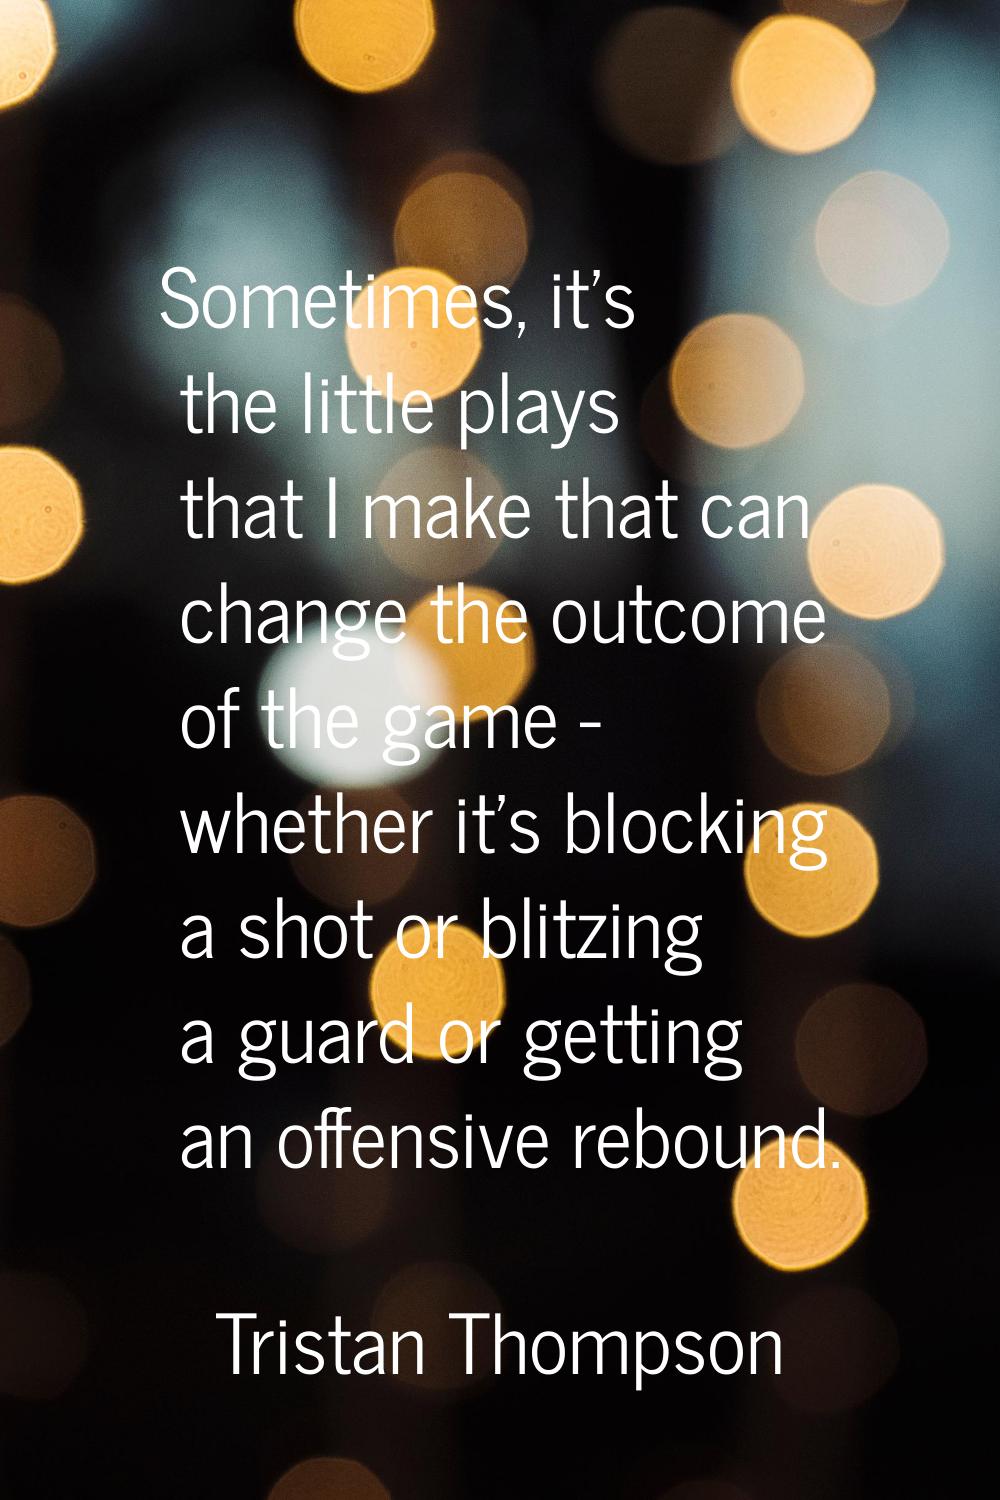 Sometimes, it's the little plays that I make that can change the outcome of the game - whether it's